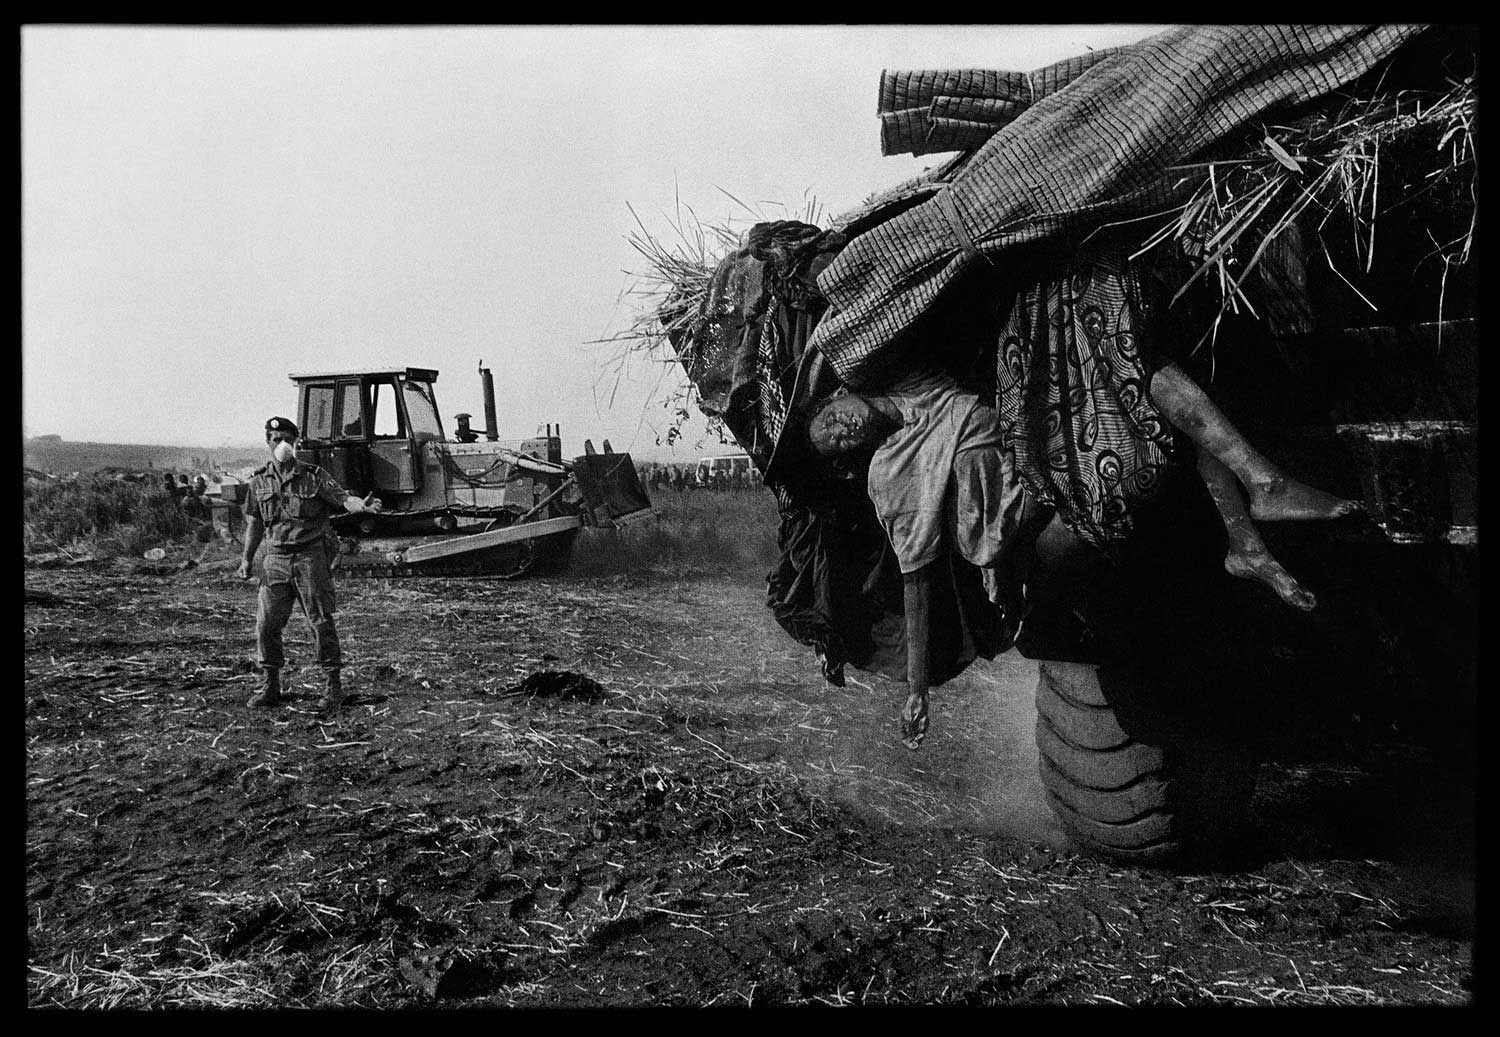 To help stop the deadly momentum of the disease, the French army mobilized earth-moving equipment in Zaire to remove and bury the dead en masse, Zaire, 1994.